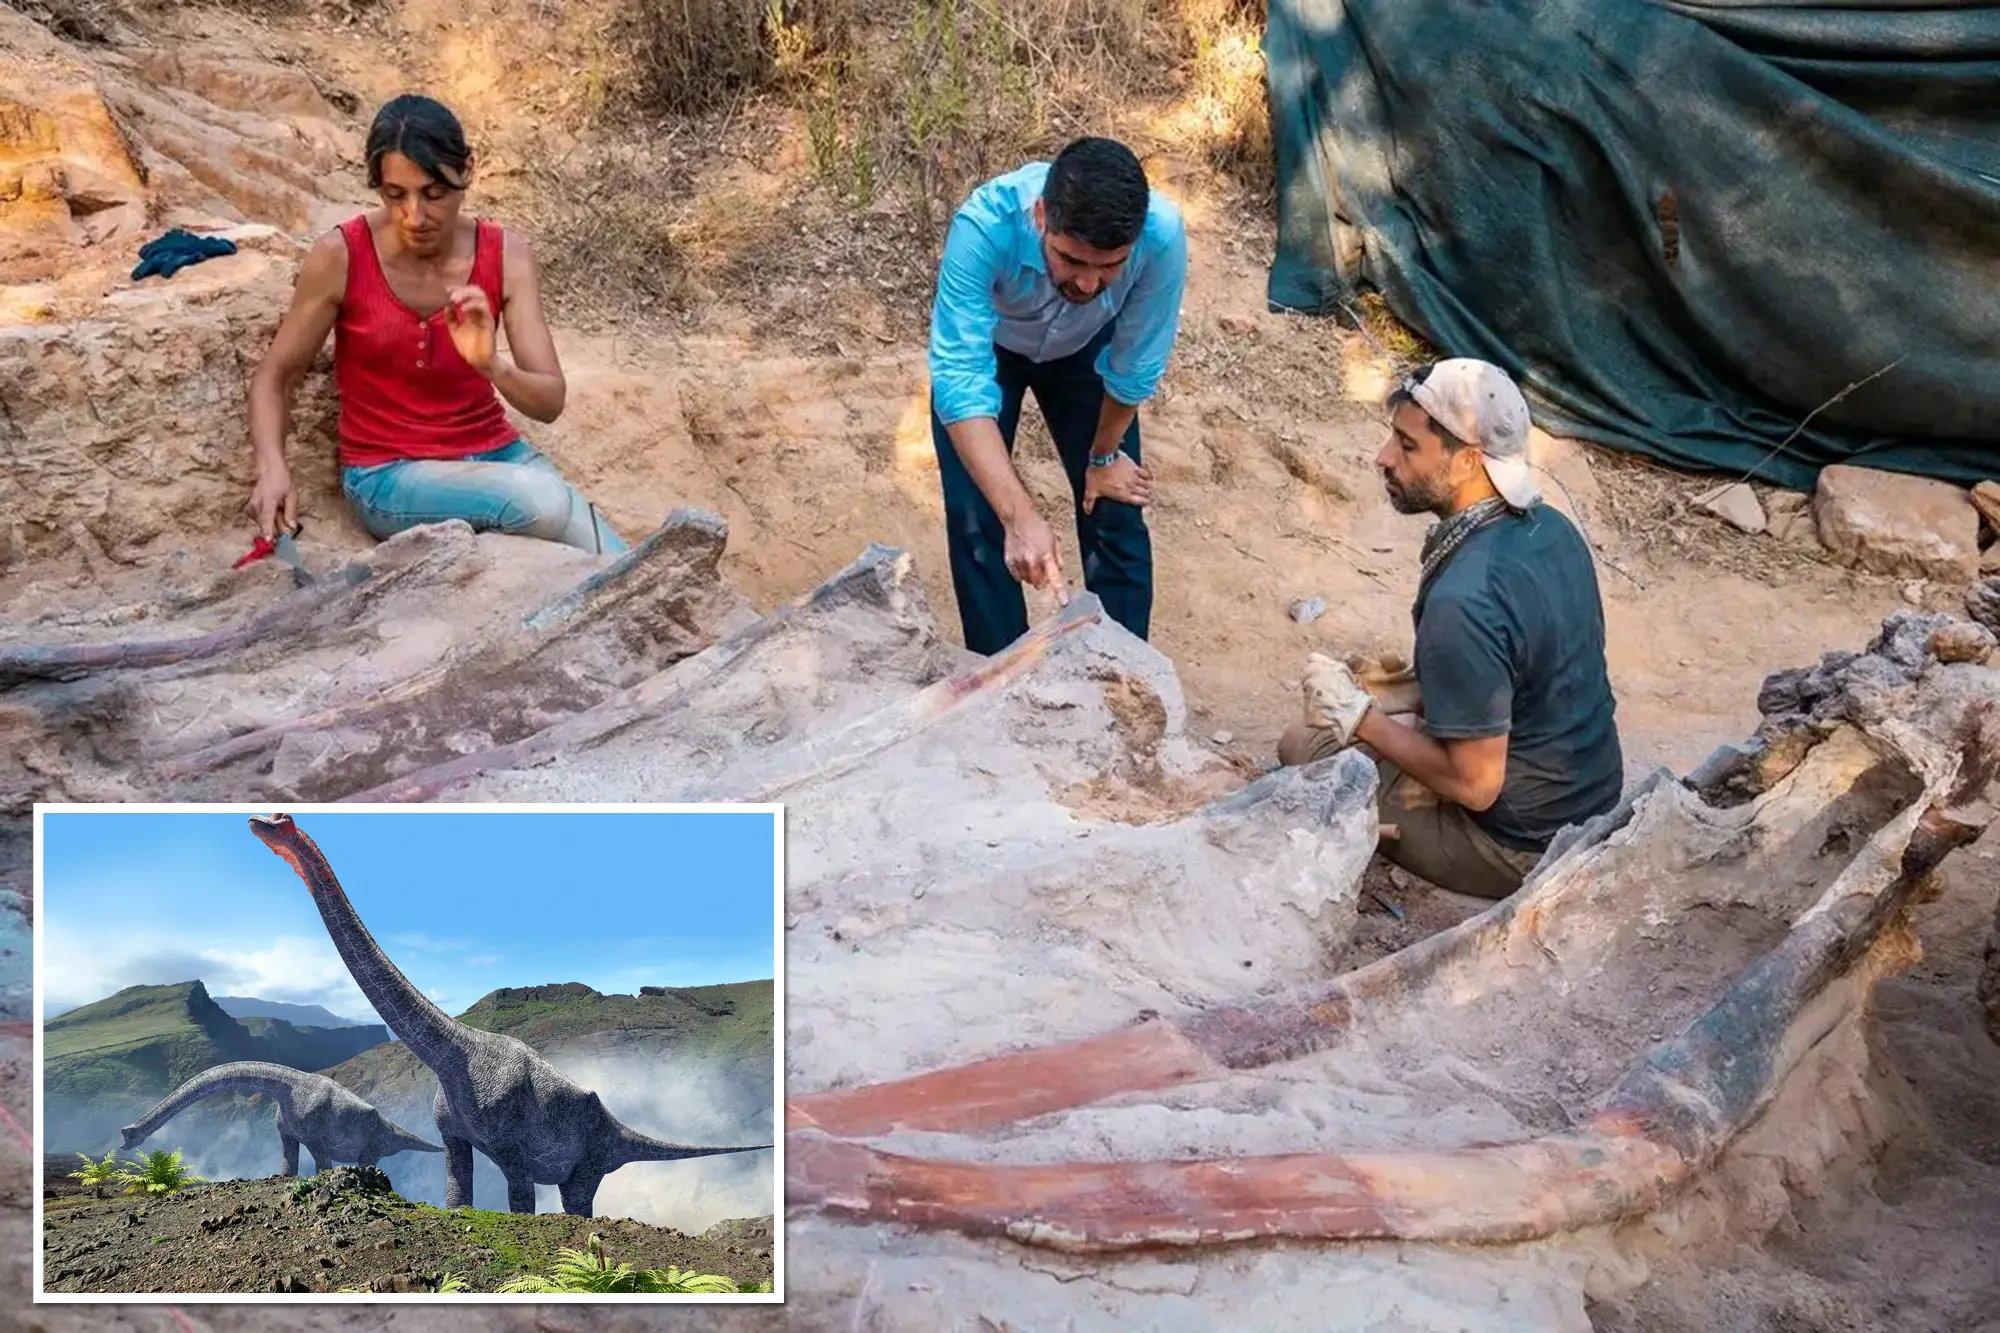 Dinosaur Skeleton Found In Portugal Man’s Backyard Could Be Europe’s Largest Ever Find: Report